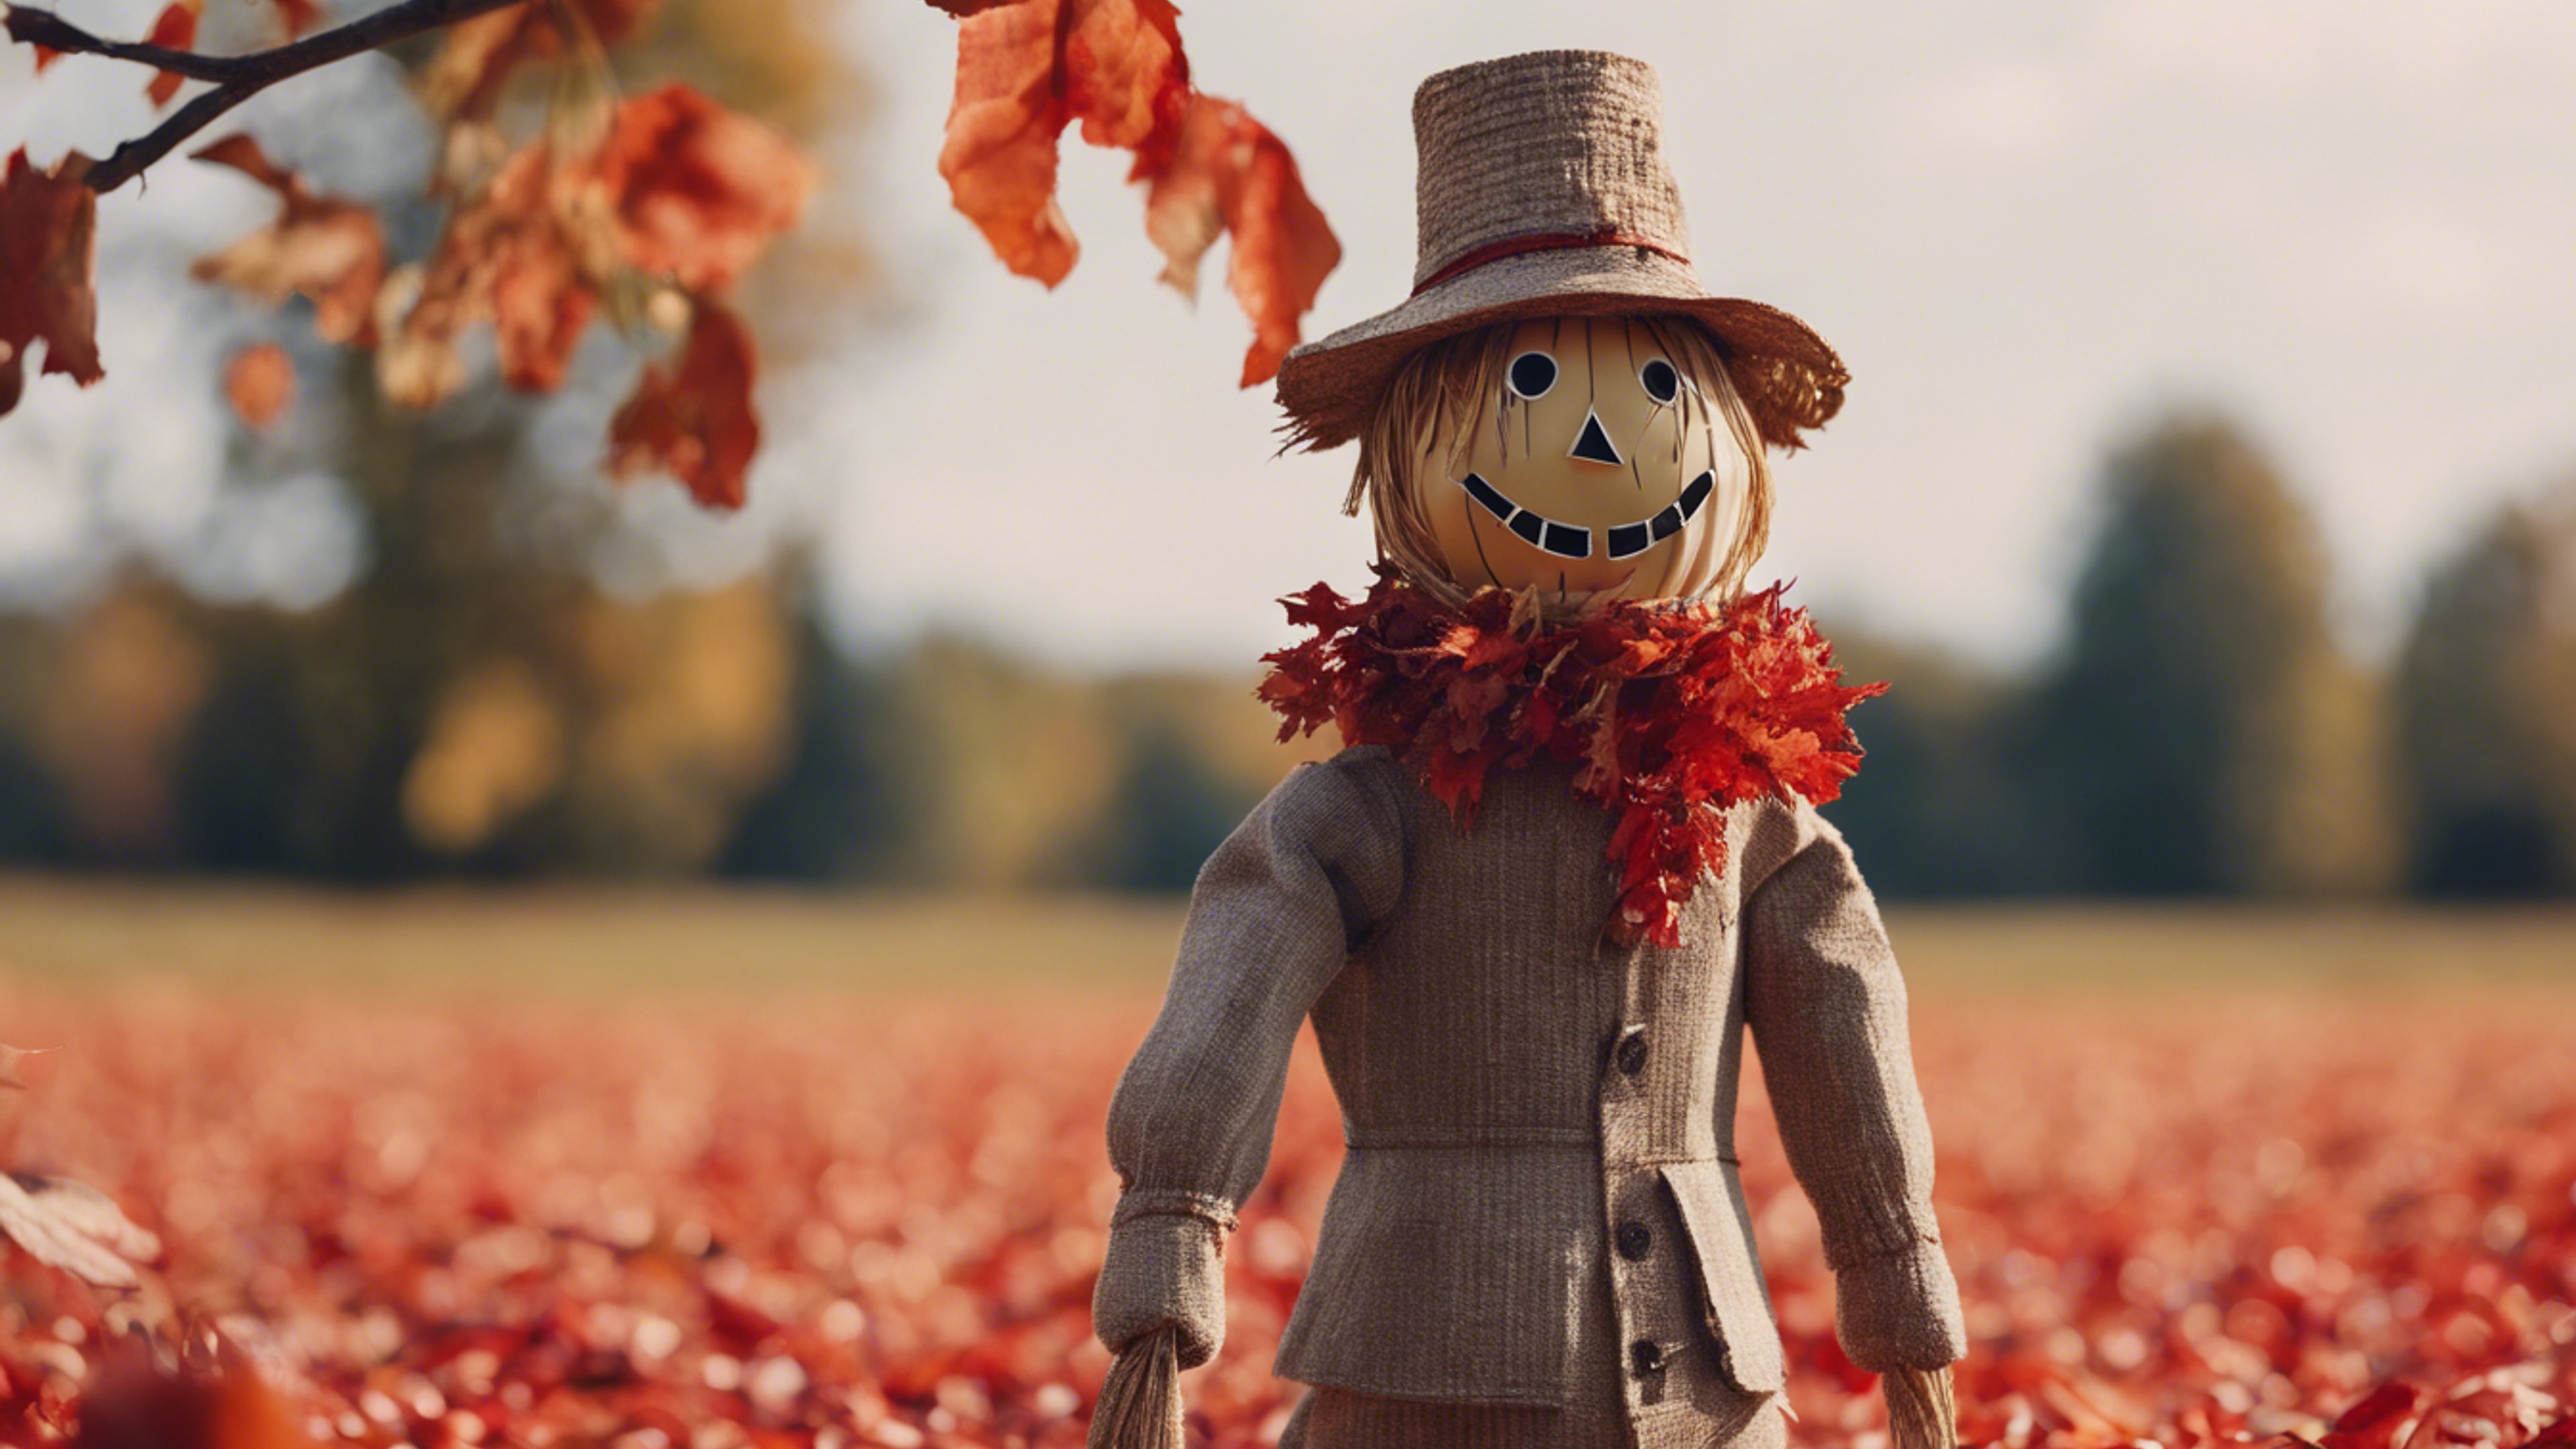 Beginning of autumn, red leaves falling onto a kawaii scarecrow in a field. Wallpaper[49667bf2524c4ef6b4de]